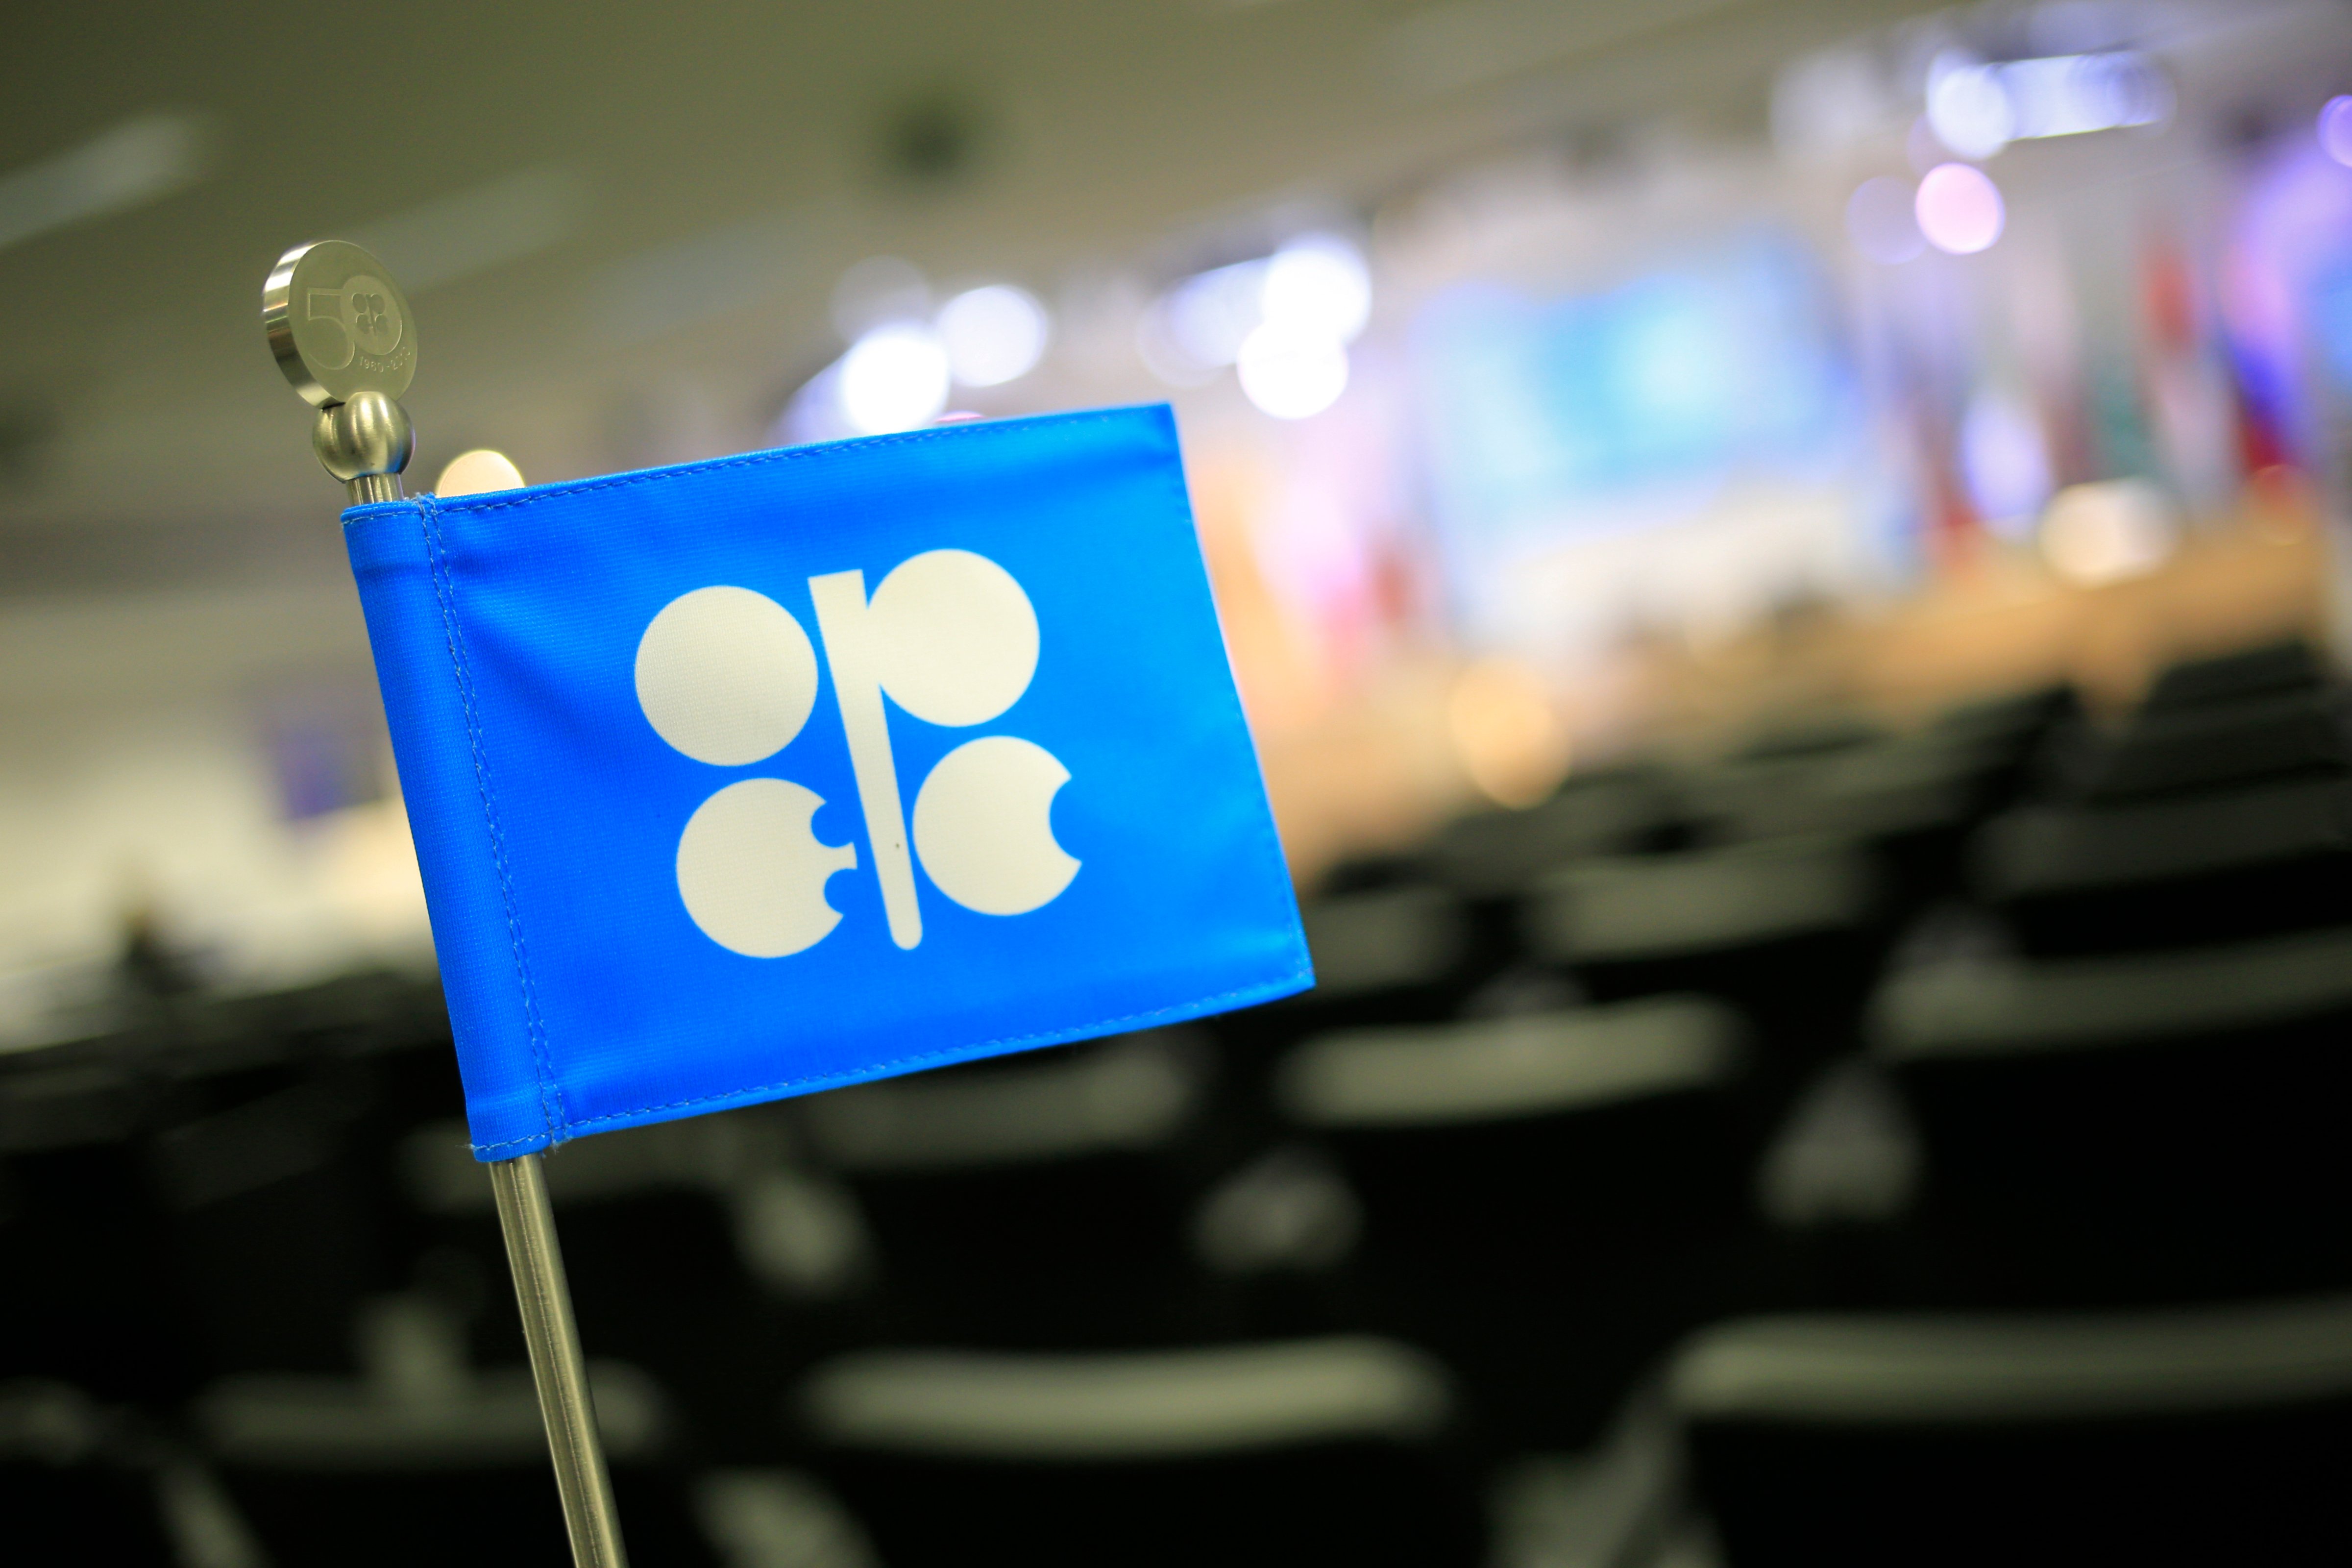 OPEC flag at the organization's headquarter on the eve of the 164th OPEC meeting in Vienna on Dec. 3, 2013.